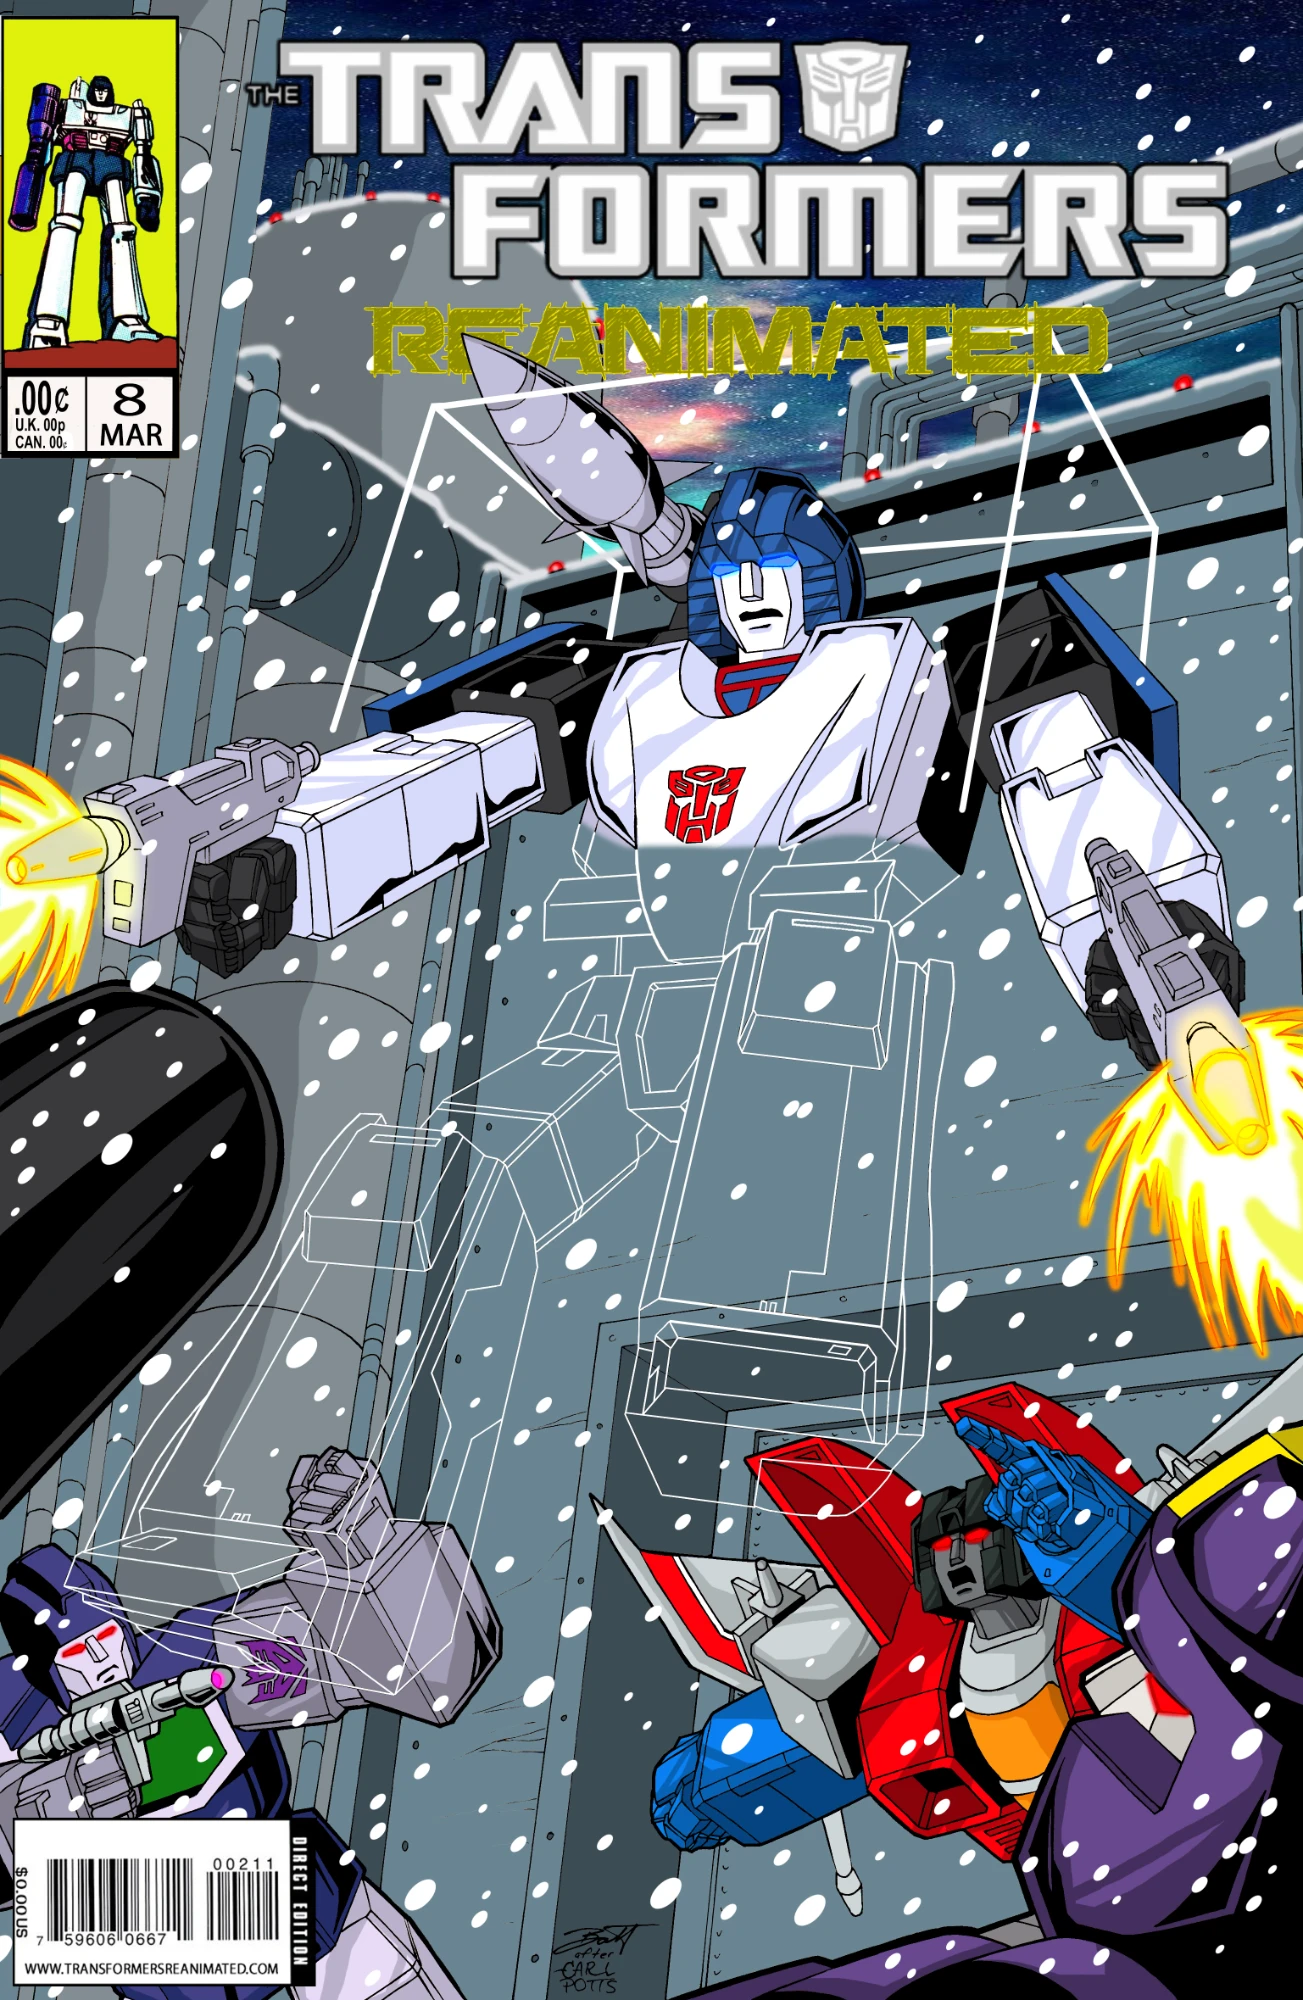 Transformers comic cover with Mirage appearing and his guns blazing at some Decepticons